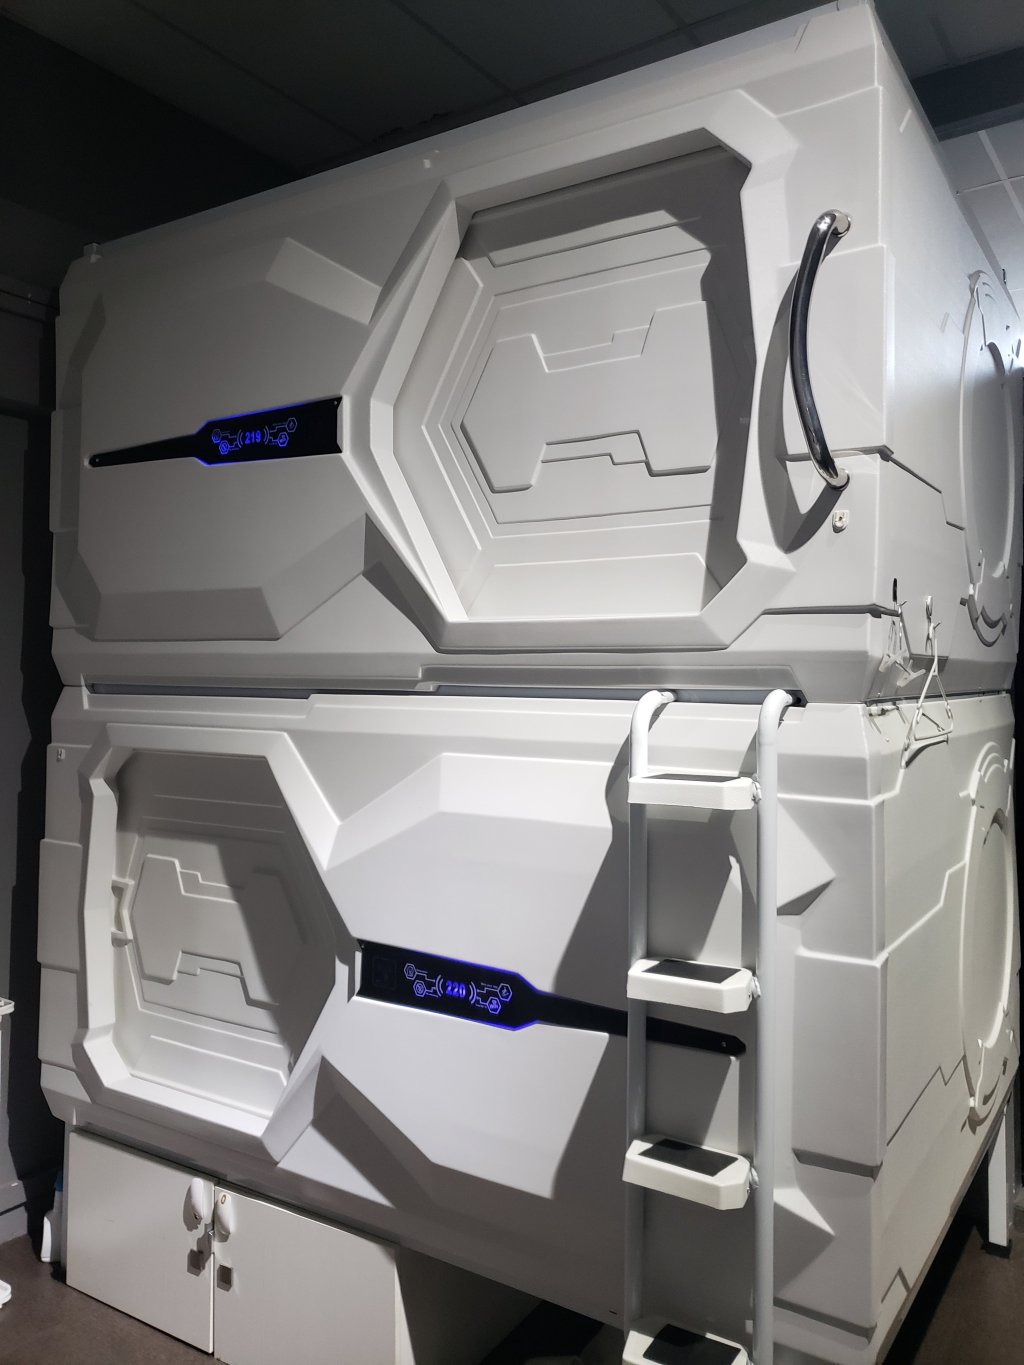 Staying in a pod capsule hotel in Singapore